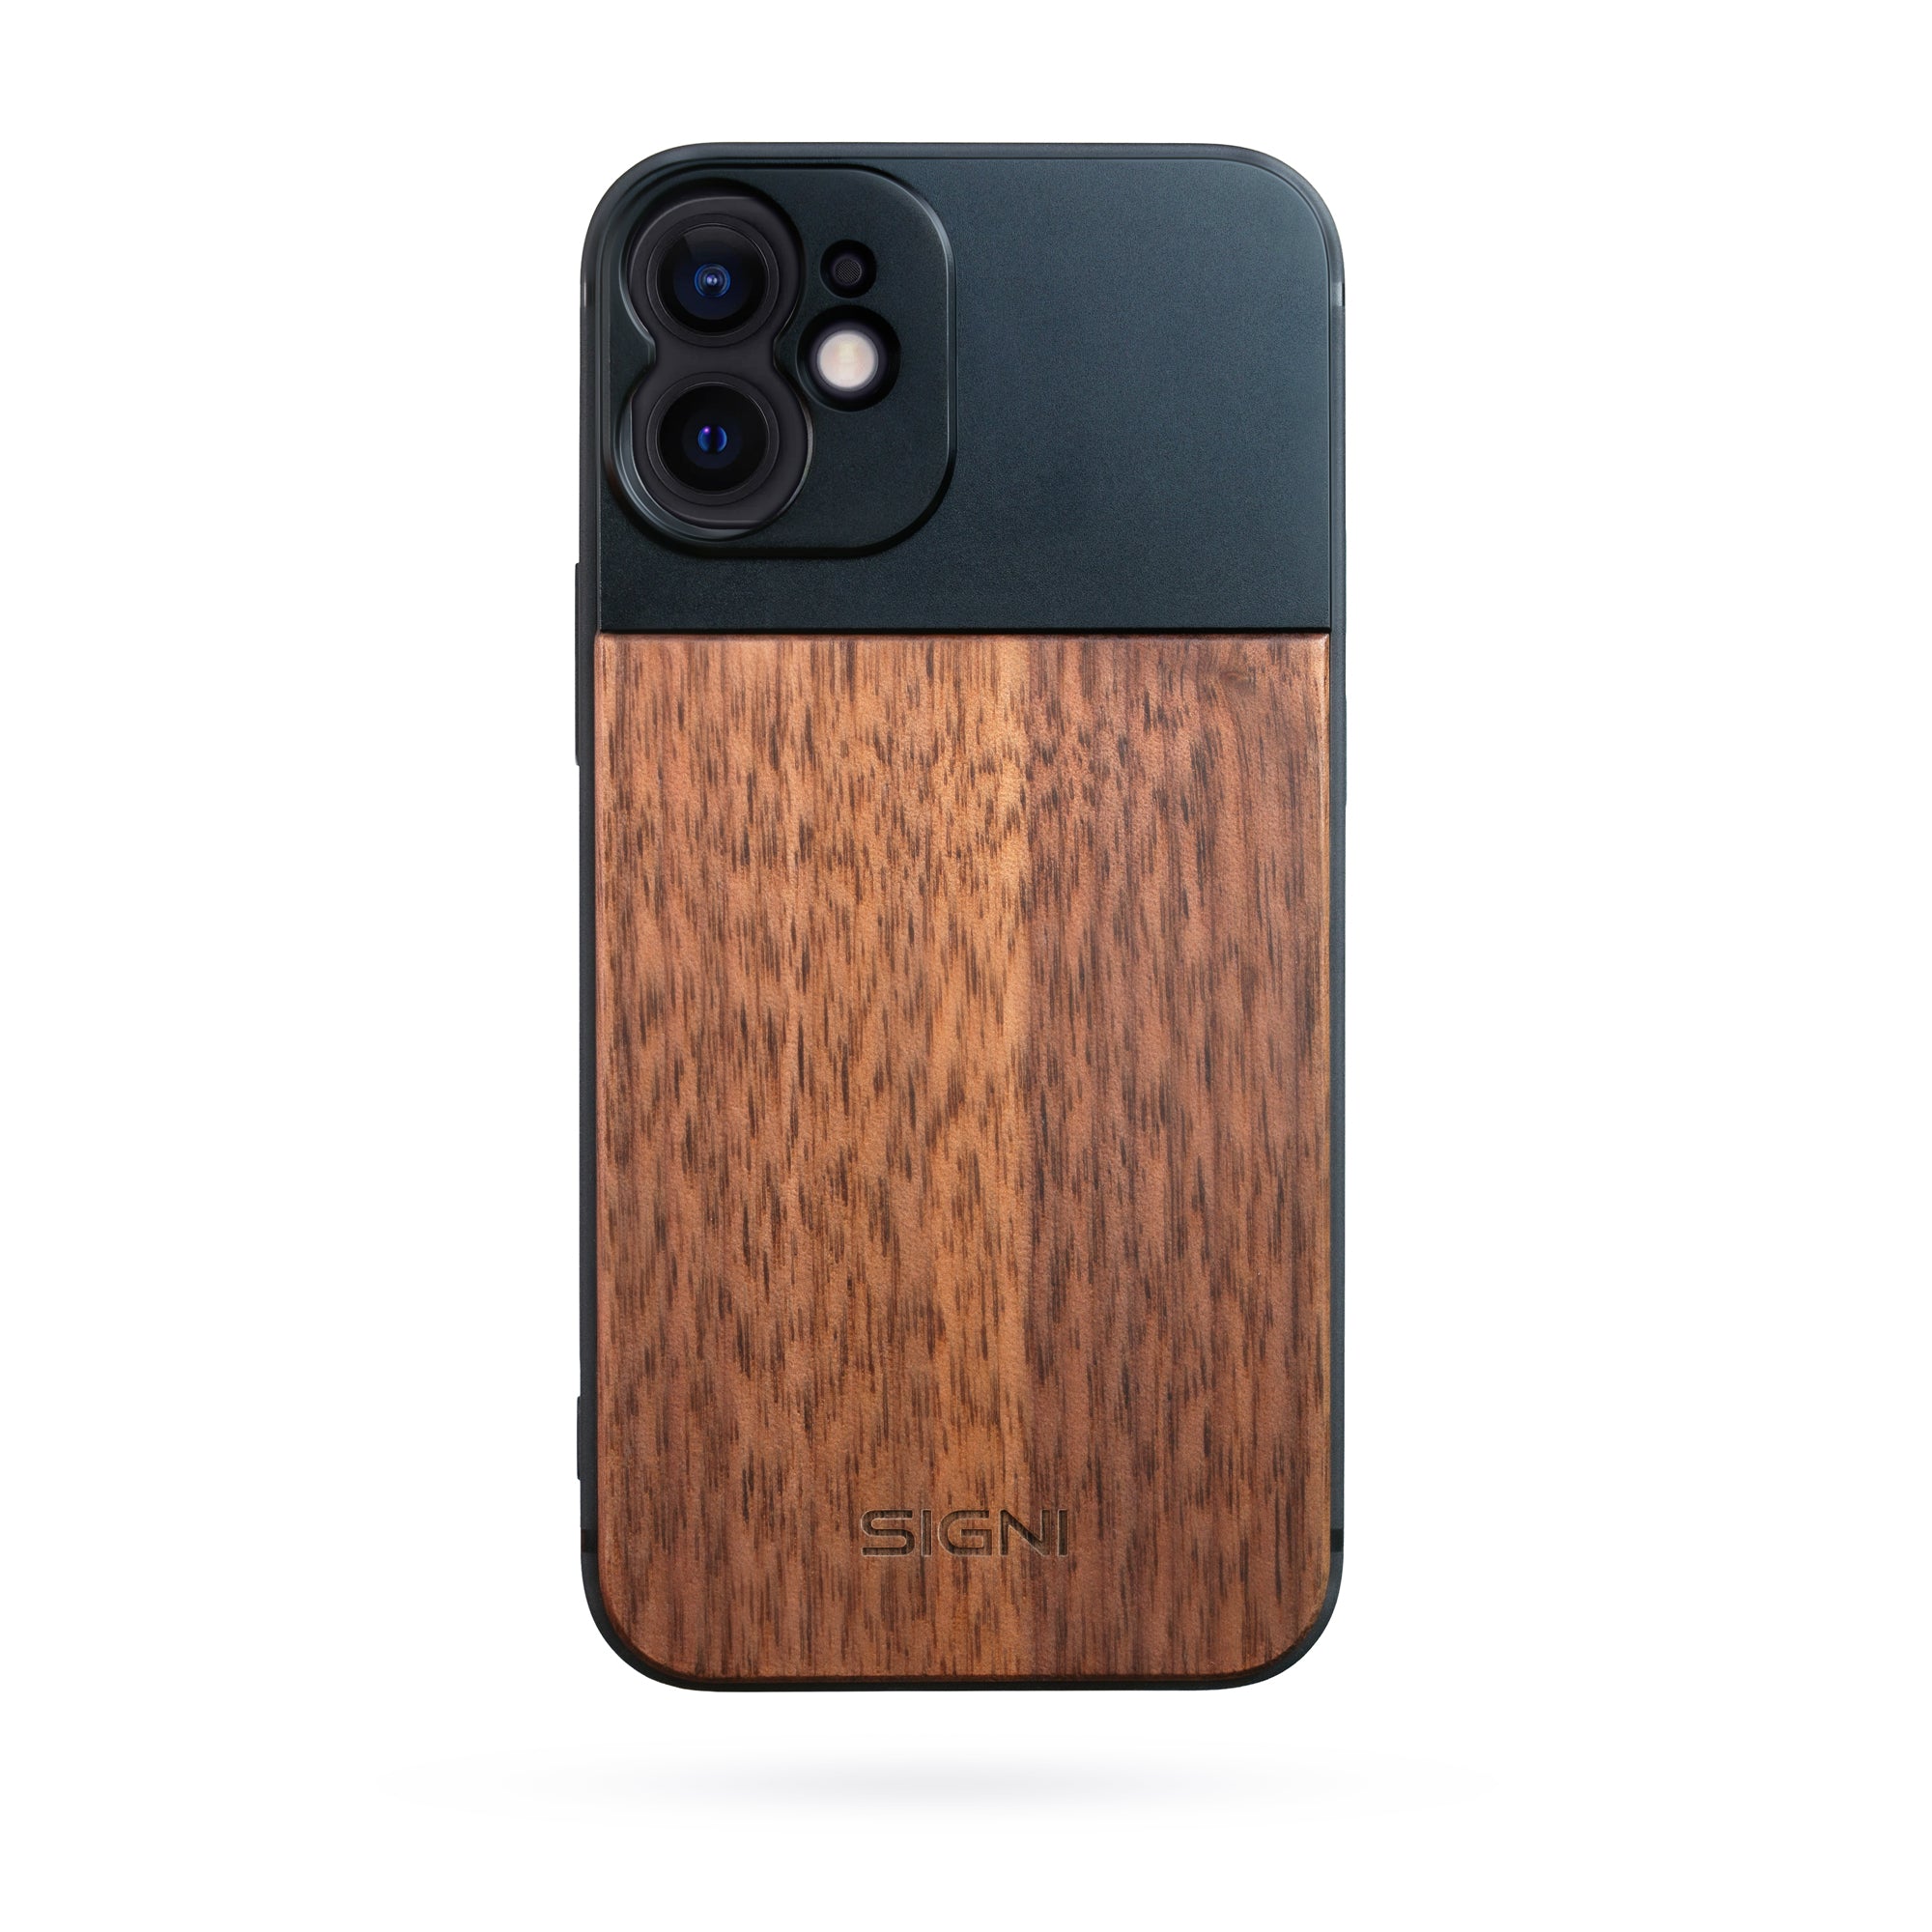 SKYVIK SIGNI One Wooden Mobile Lens case (iPhone 12 Mini)